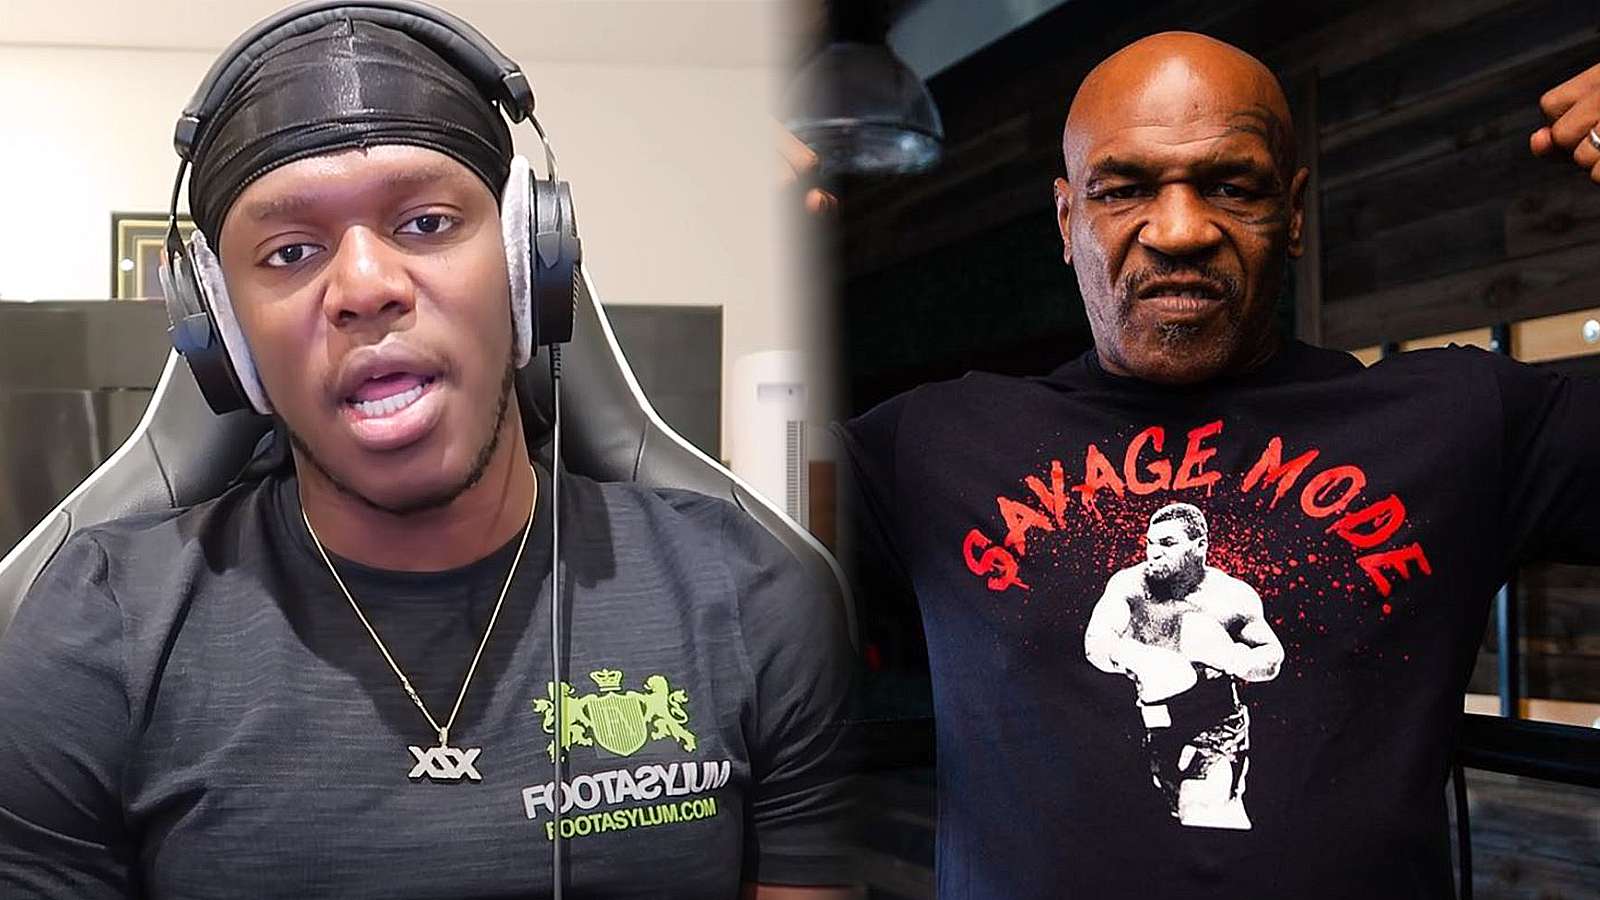 KSI speaks to his audience beside a photo of Mike Tyson flexing his muscles.